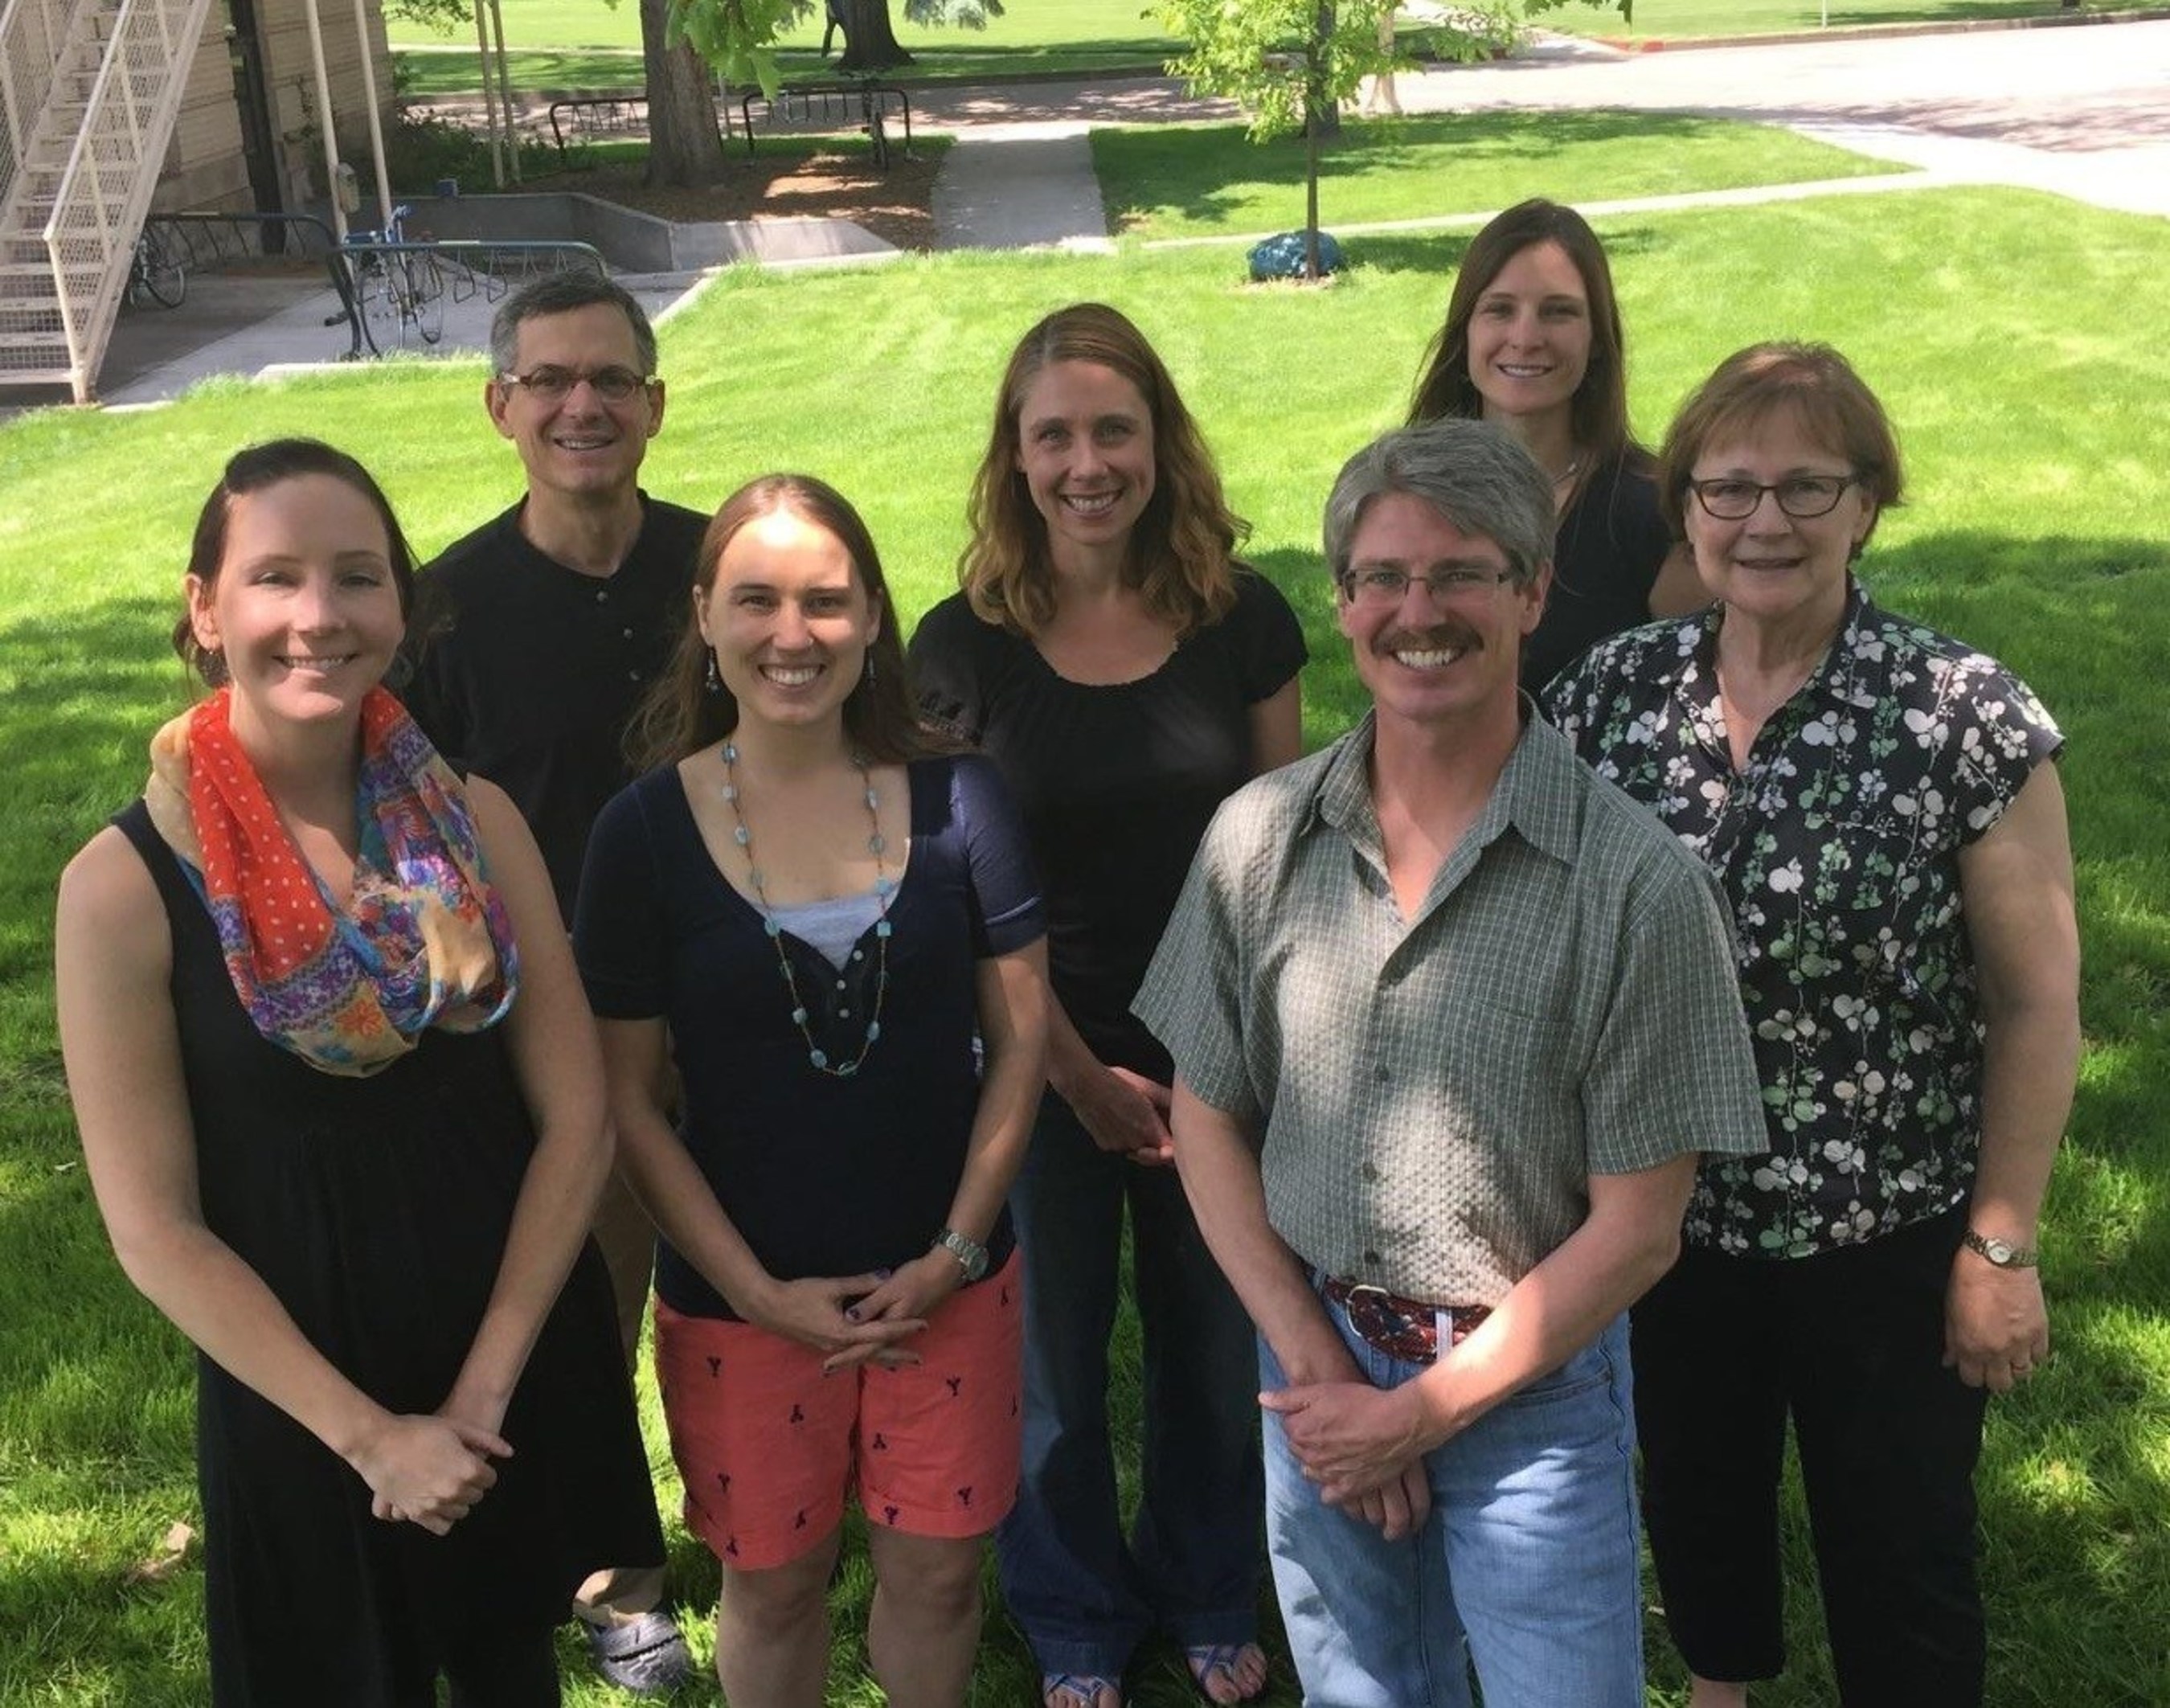 REST Project team from Colorado State University's Department of Occupational Therapy (from left to right: Shannon Lavey, Craig Spooner, Natalie Vickers, Arlene Schmid, Aaron Eakman, Erica Schelly, Cathy Schelly; not shown: Joshua Burns, and Kim Henry - Department of Psychology)